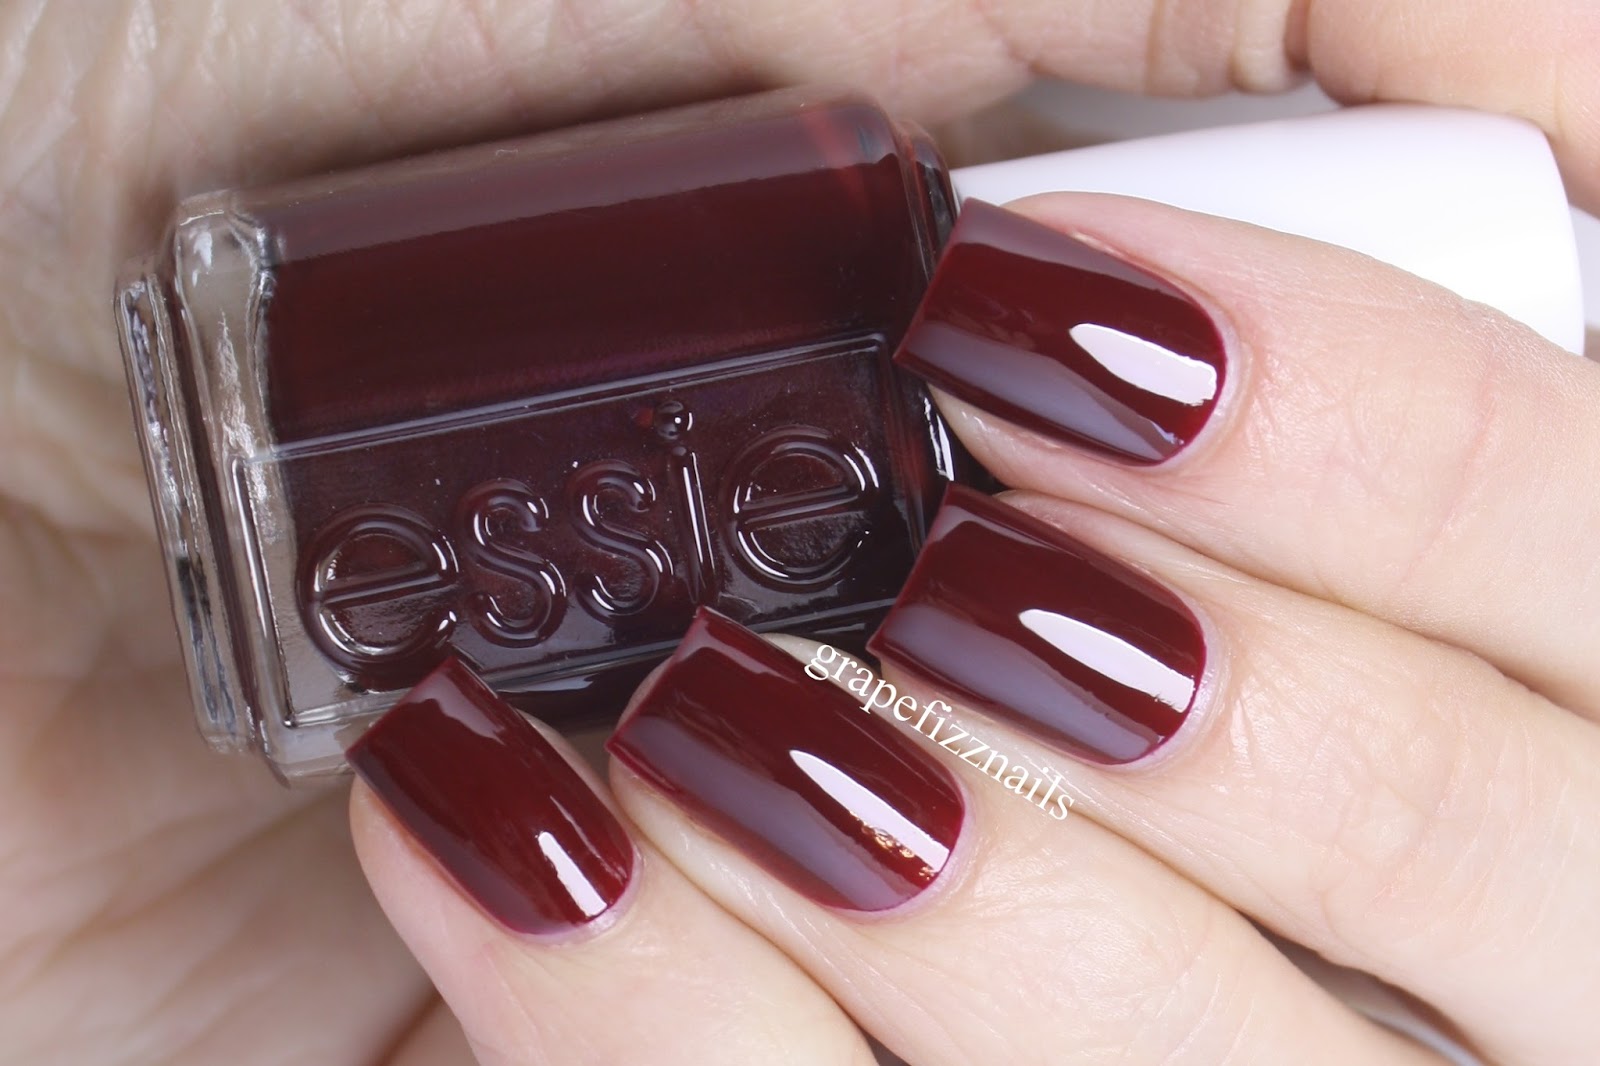 2. Essie Nail Polish in "Berry Naughty" - wide 6